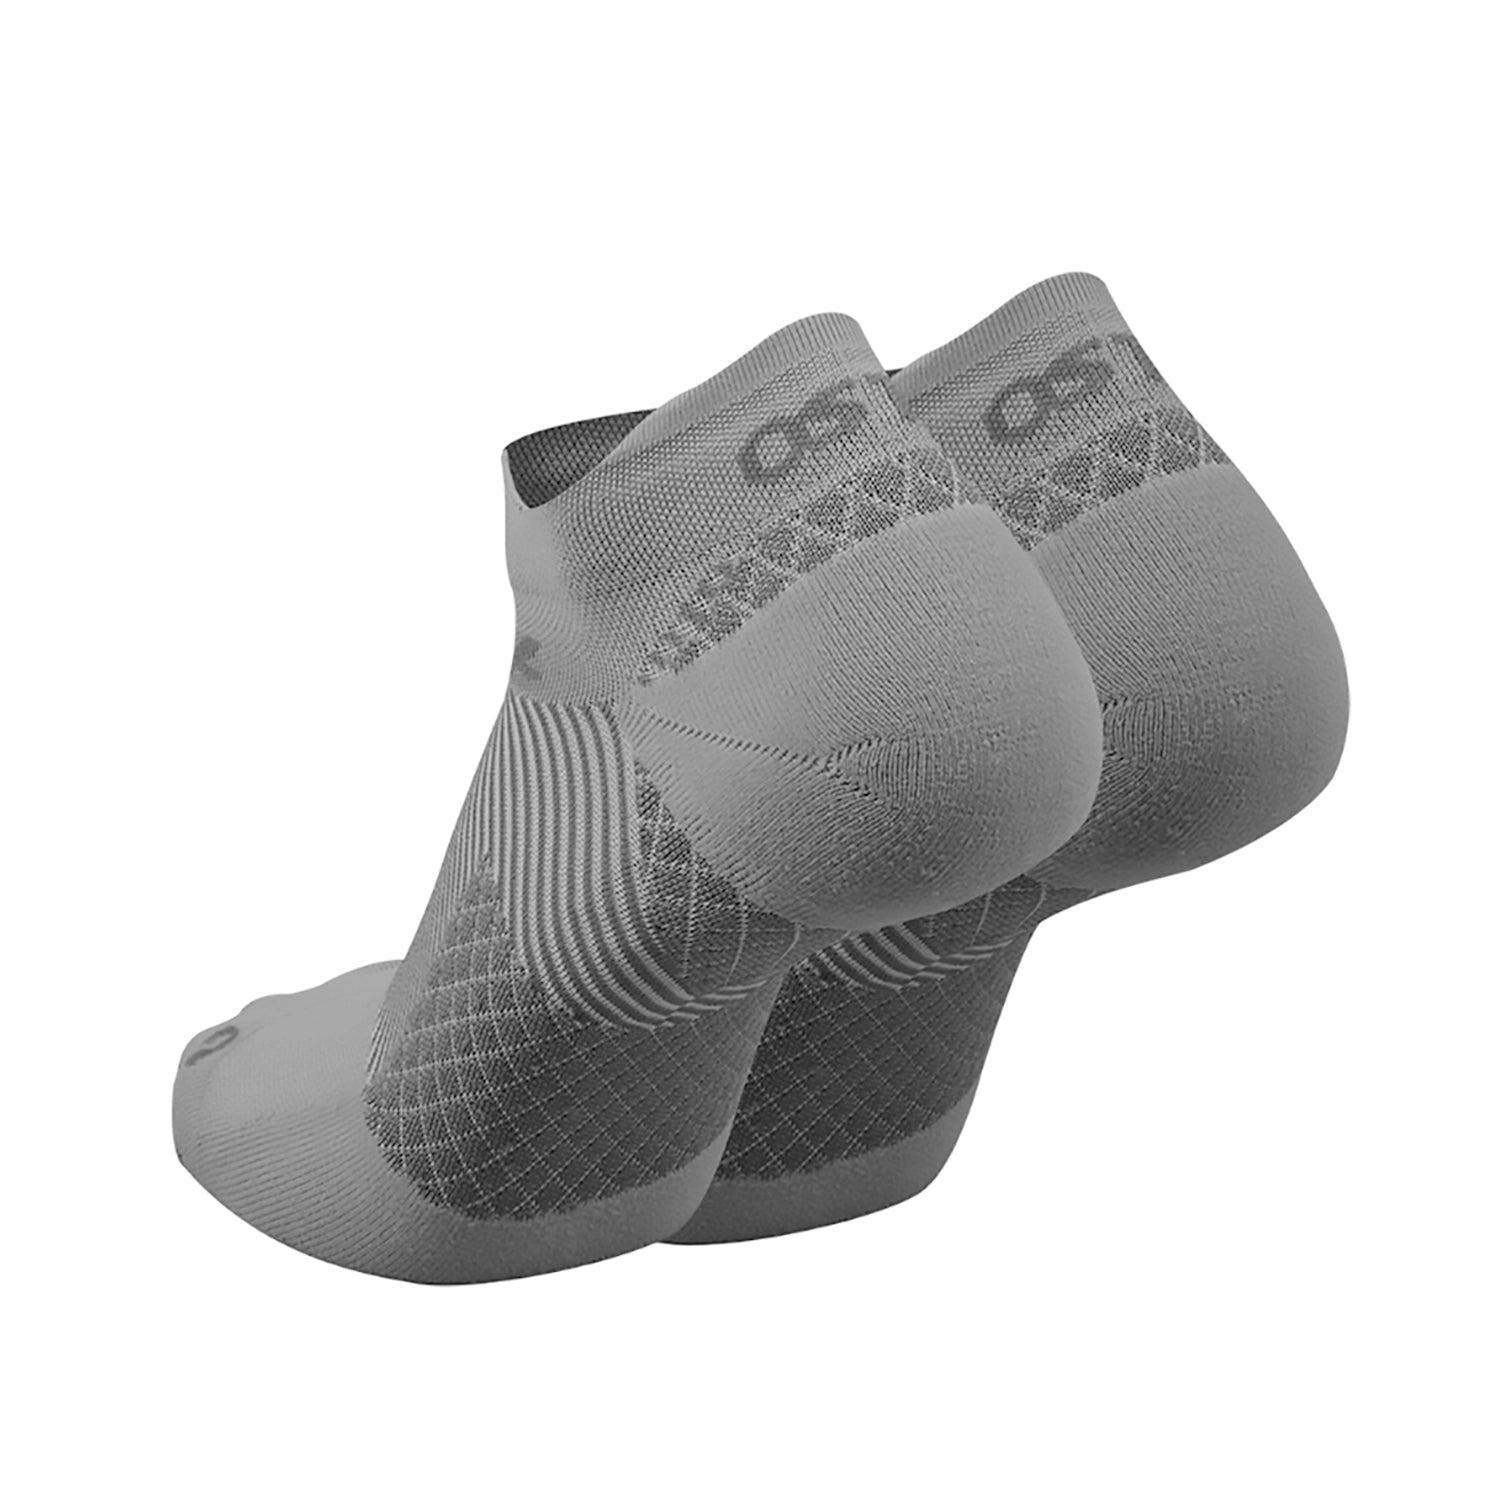 R-Gear OS1st Plantar Fasciitis No Show 2 Pack Socks Injury Recovery